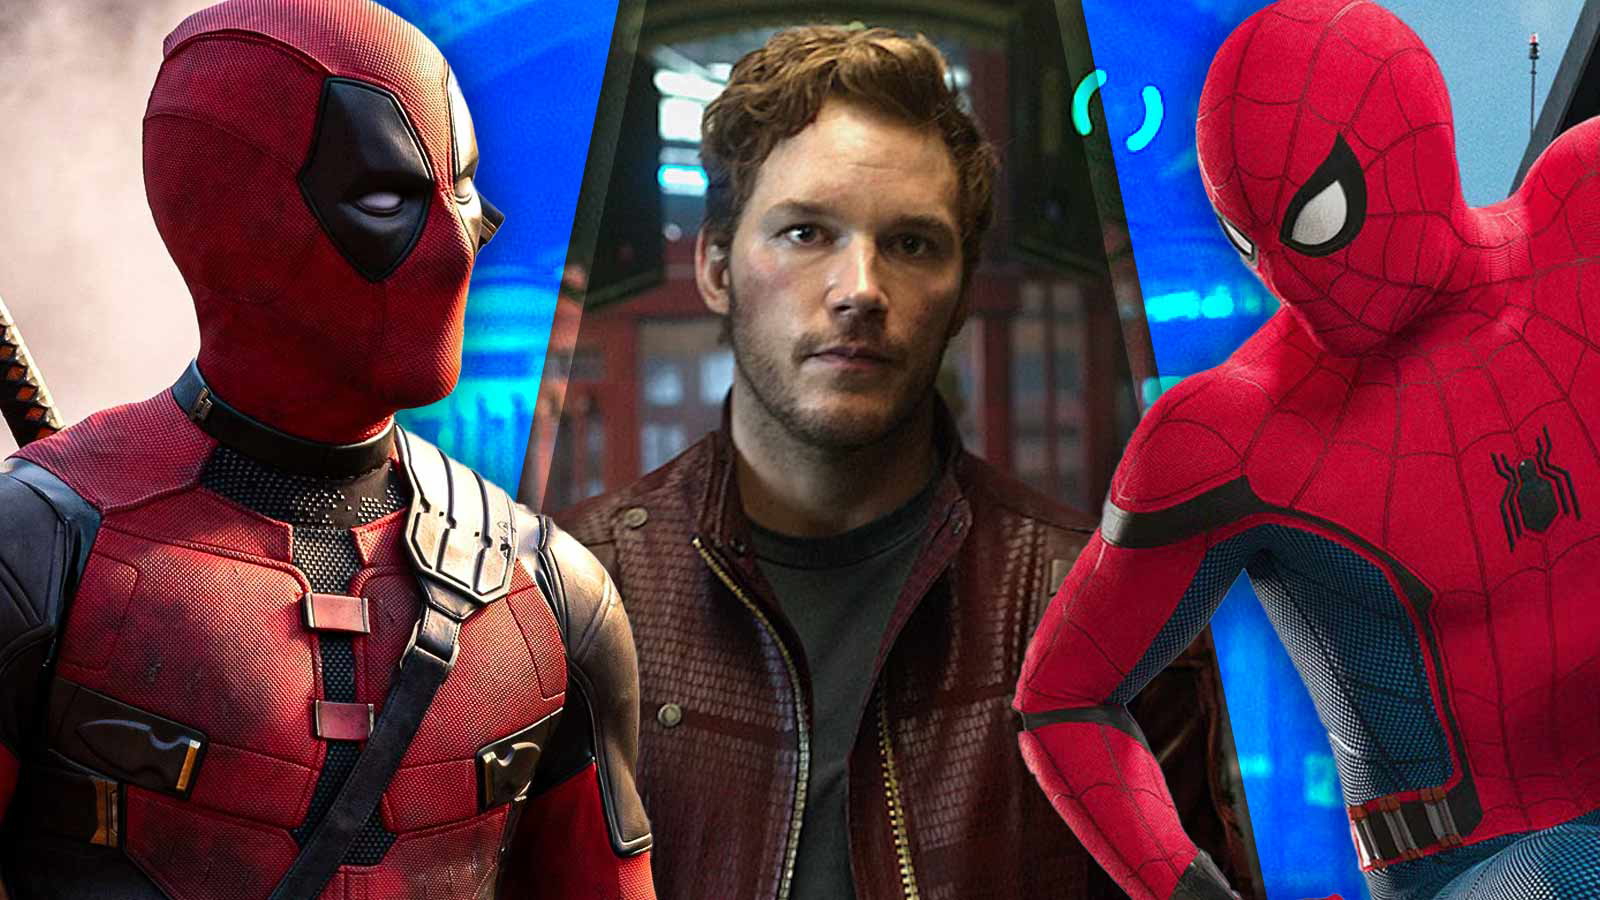 Forget About Deadpool vs Spider-Man, MCU Fans Want Ryan Reynolds to Face Off Against Chris Pratt’s Demigod in MCU